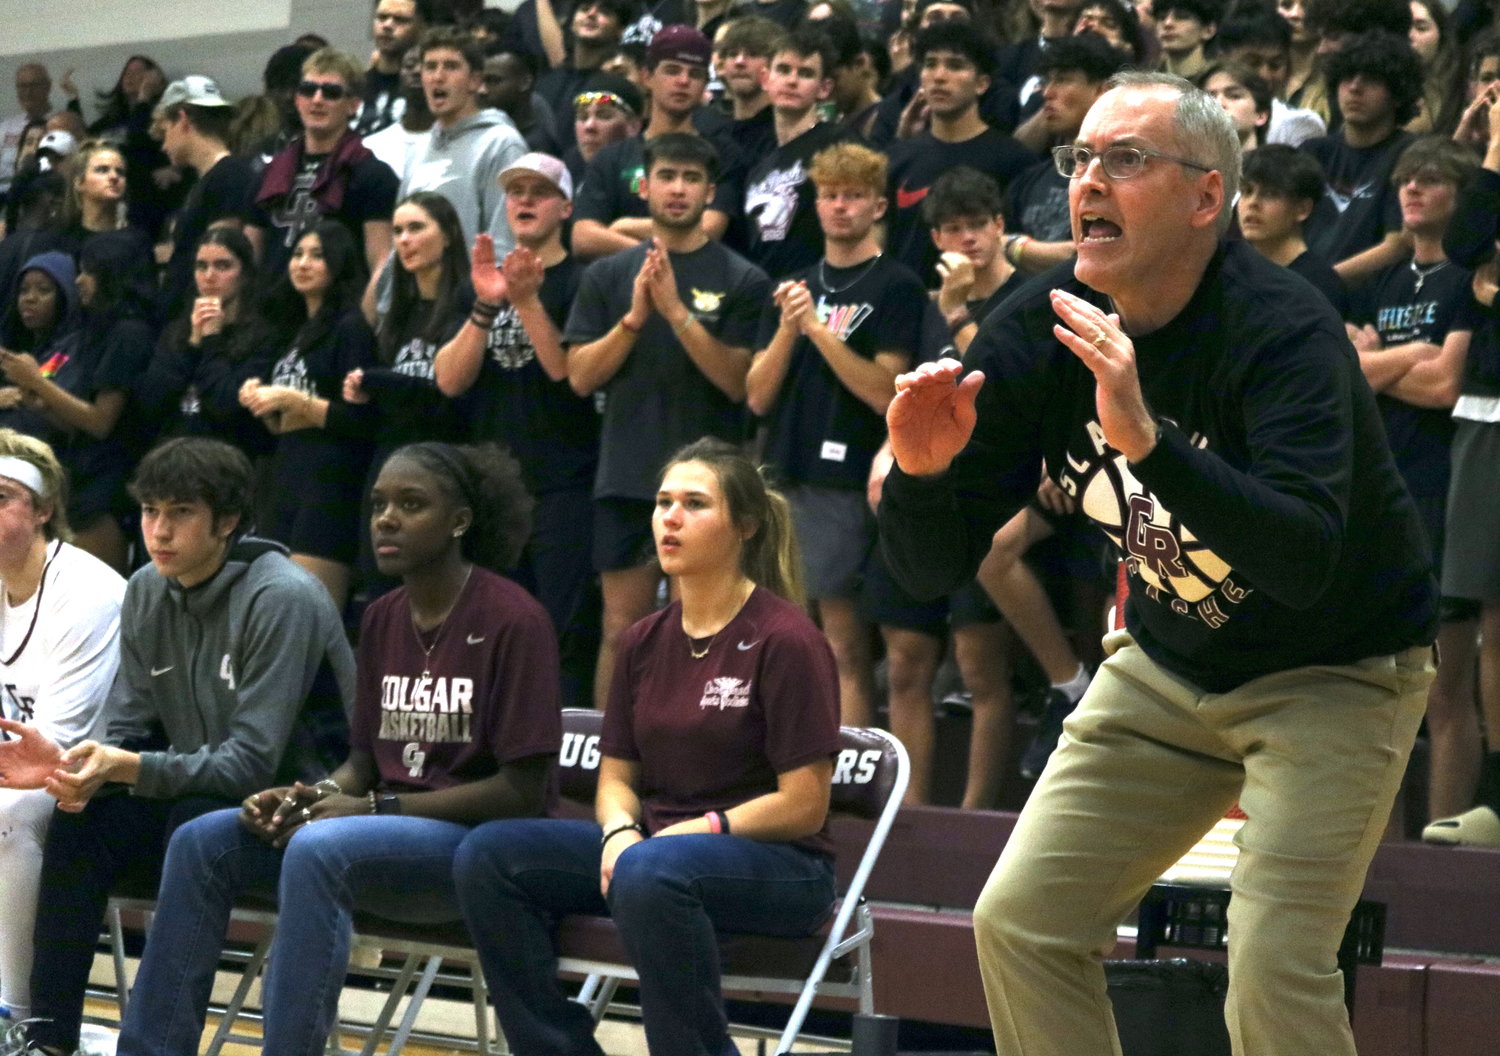 Neil King talks to his team during Wednesday's game between Cinco Ranch and Taylor at the Cinco Ranch gym.